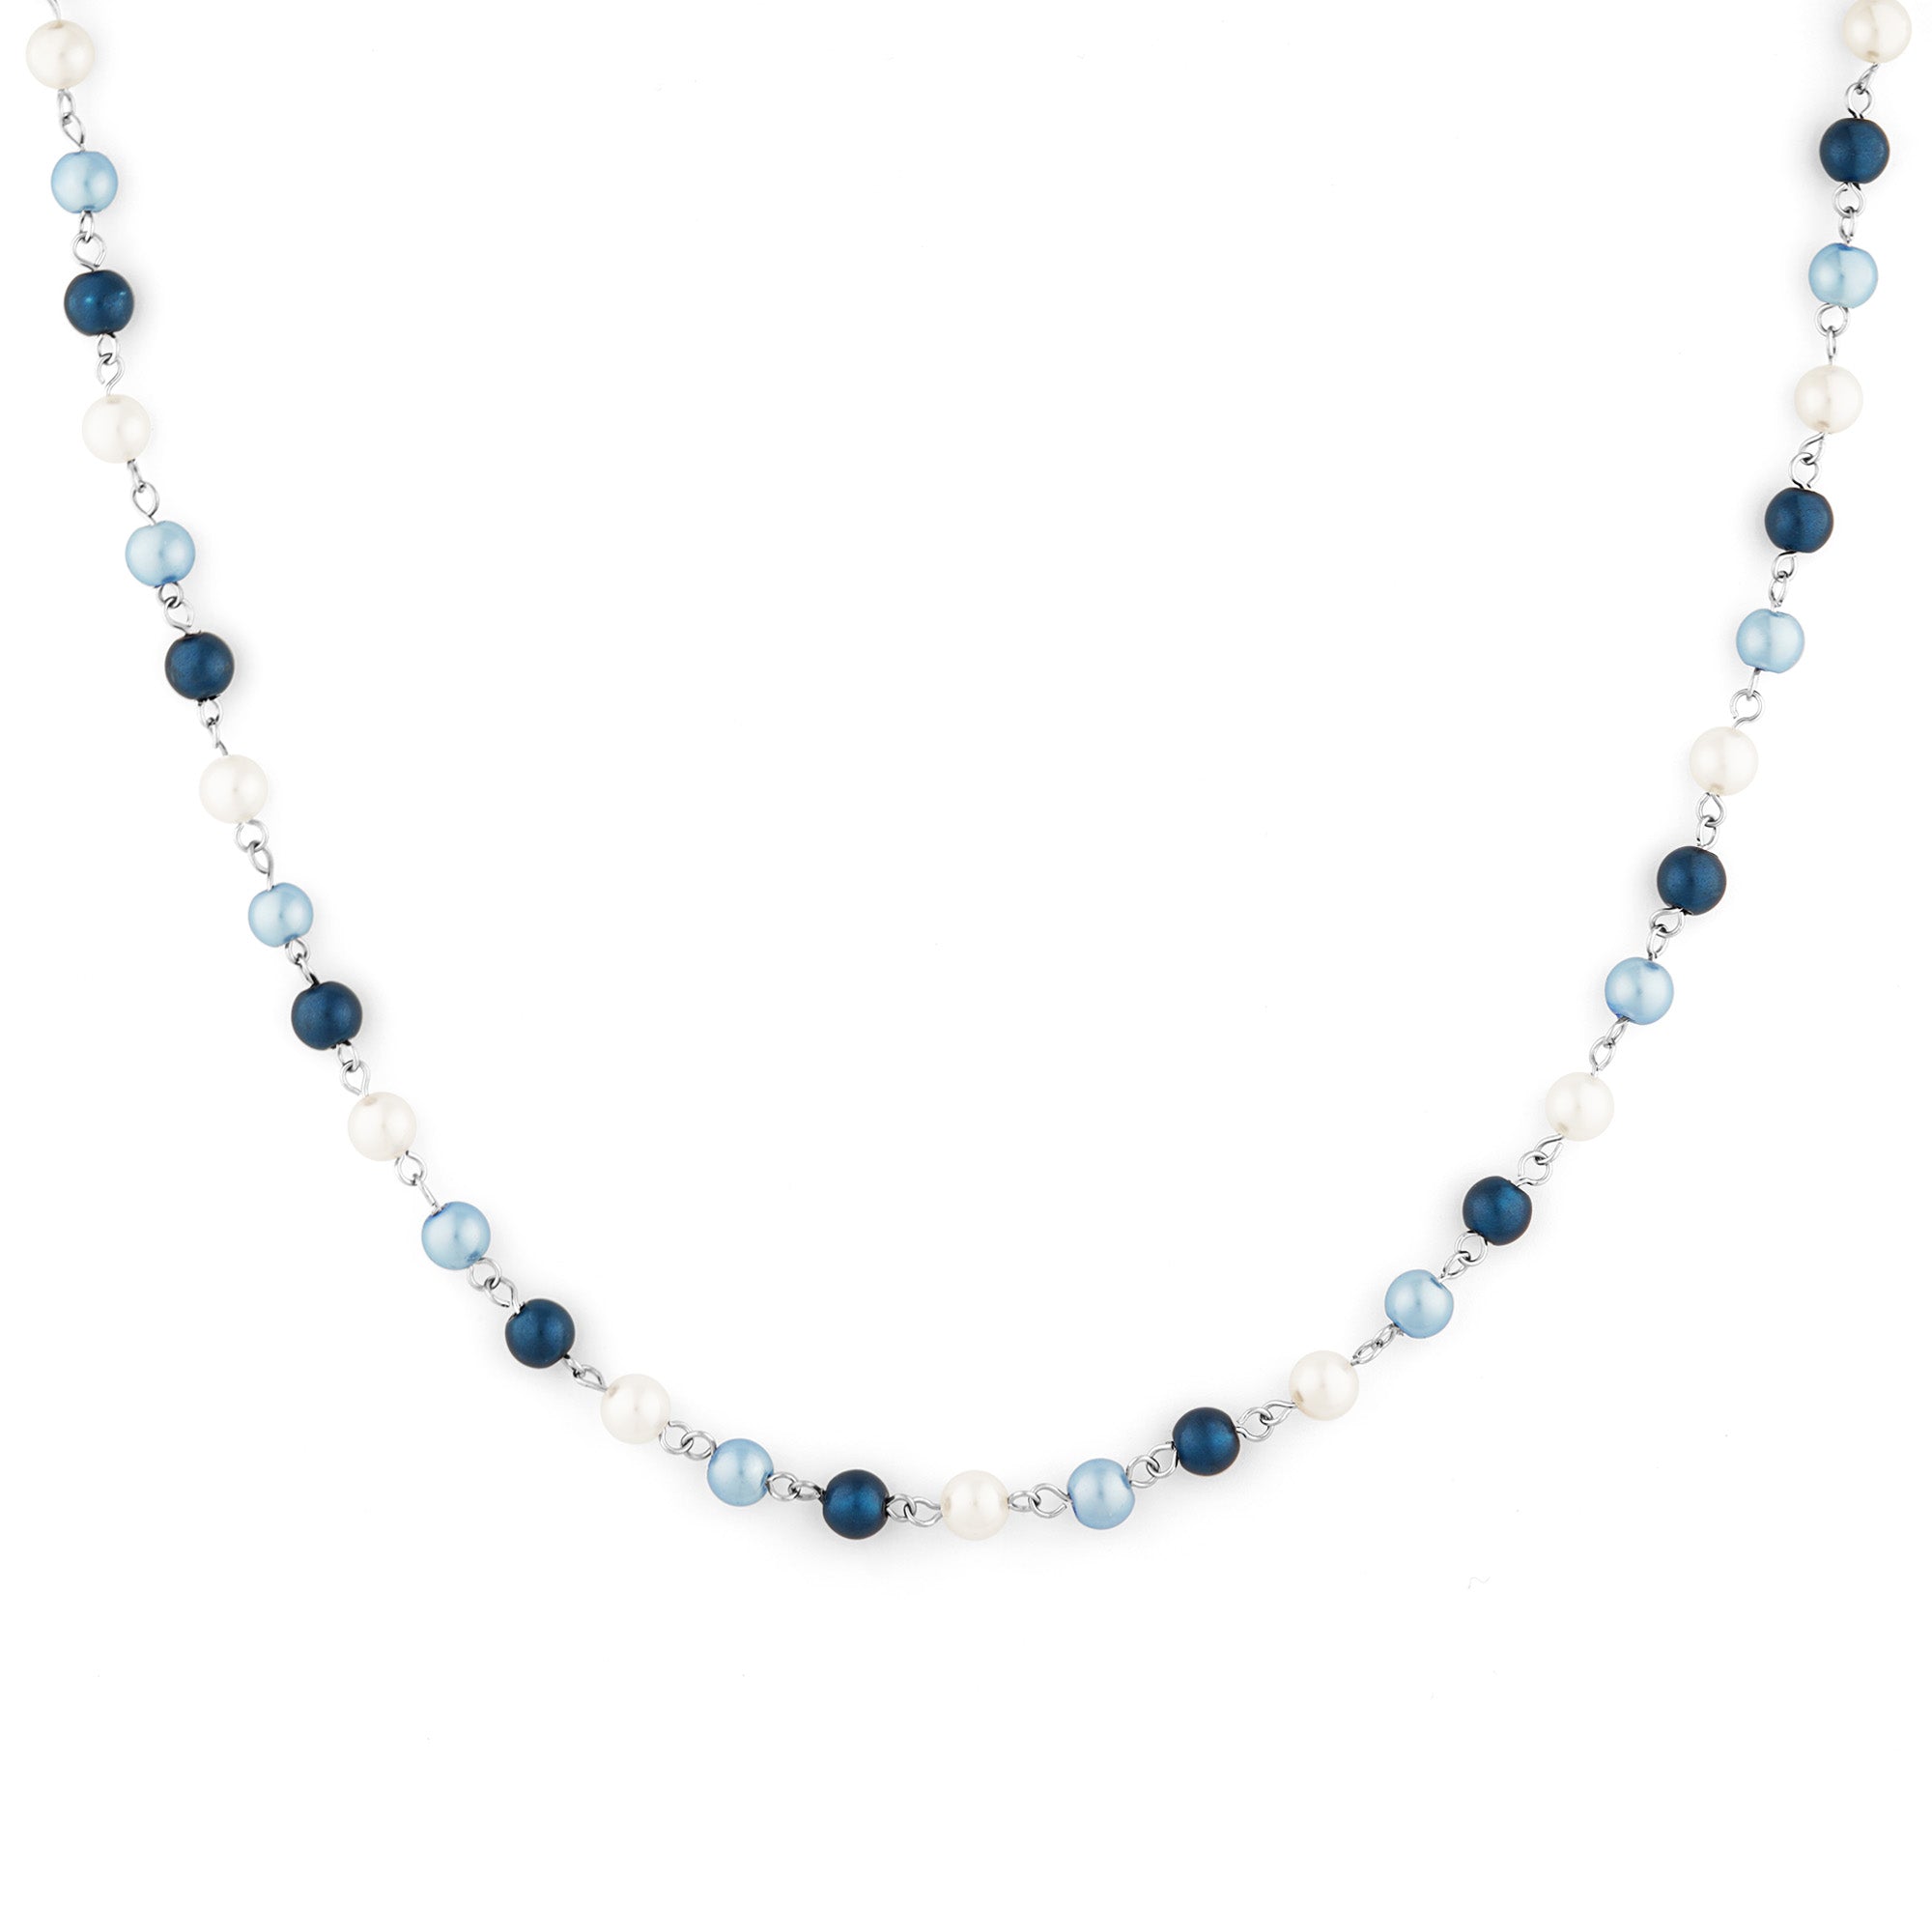 Five jewelry pearls necklace made with 2 shades of blue glass beads and white pearls, crafted with natural shell. 45cm + 5cm extension, rollo chain for adjustment. Fashion accessory, statement jewelry. Designed in Montreal, Canada.